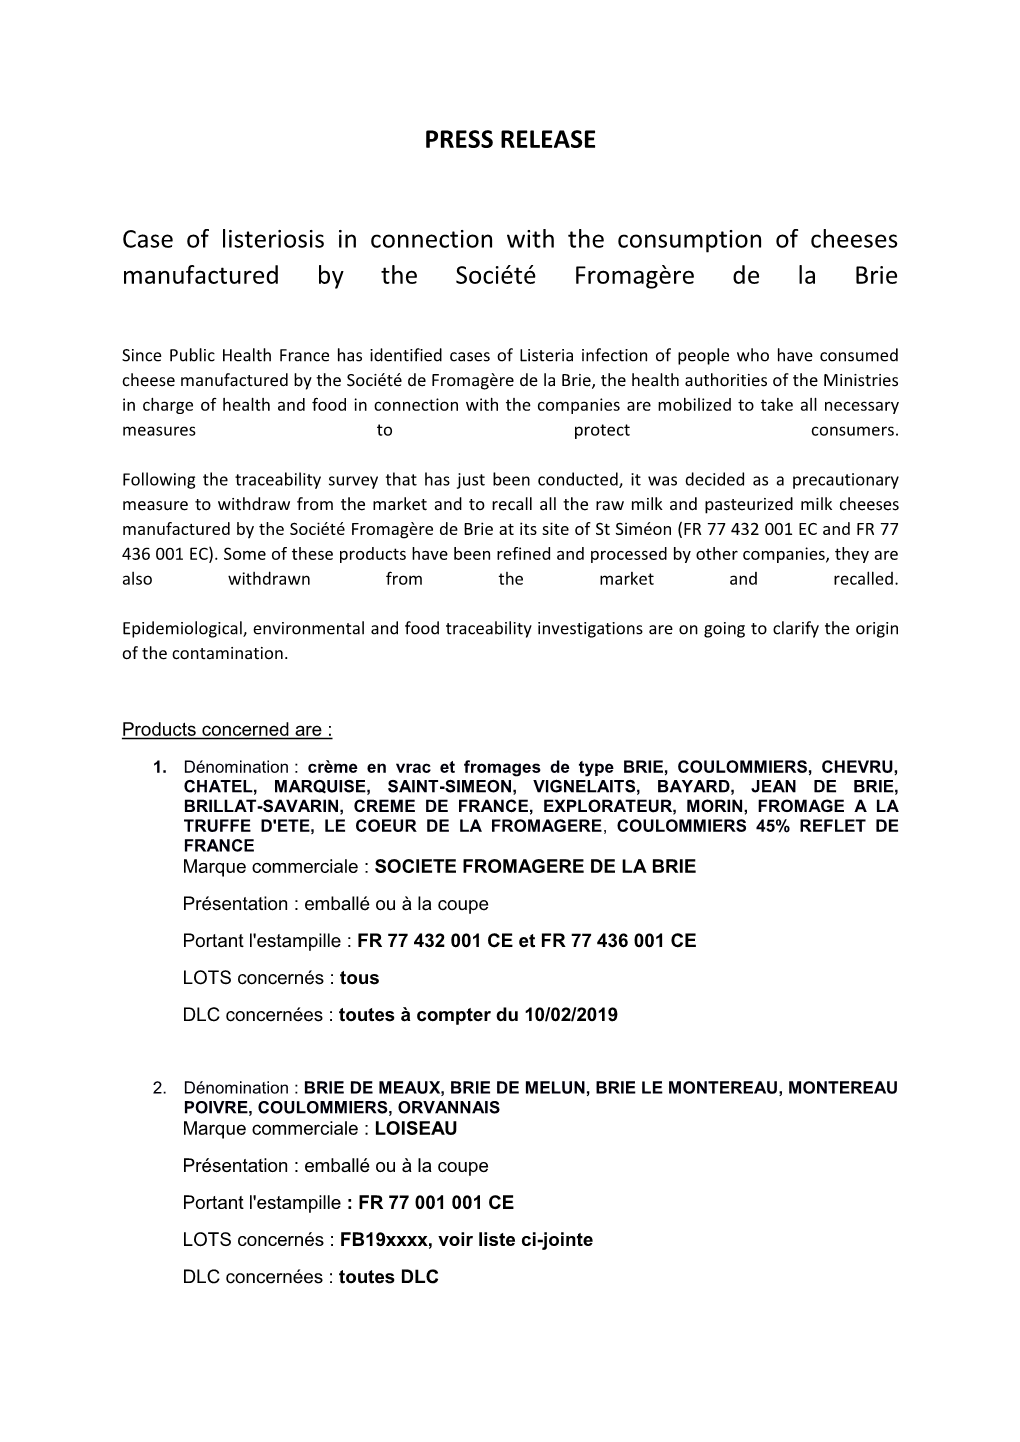 PRESS RELEASE Case of Listeriosis in Connection with the Consumption of Cheeses Manufactured by the Société Fromagère De La B